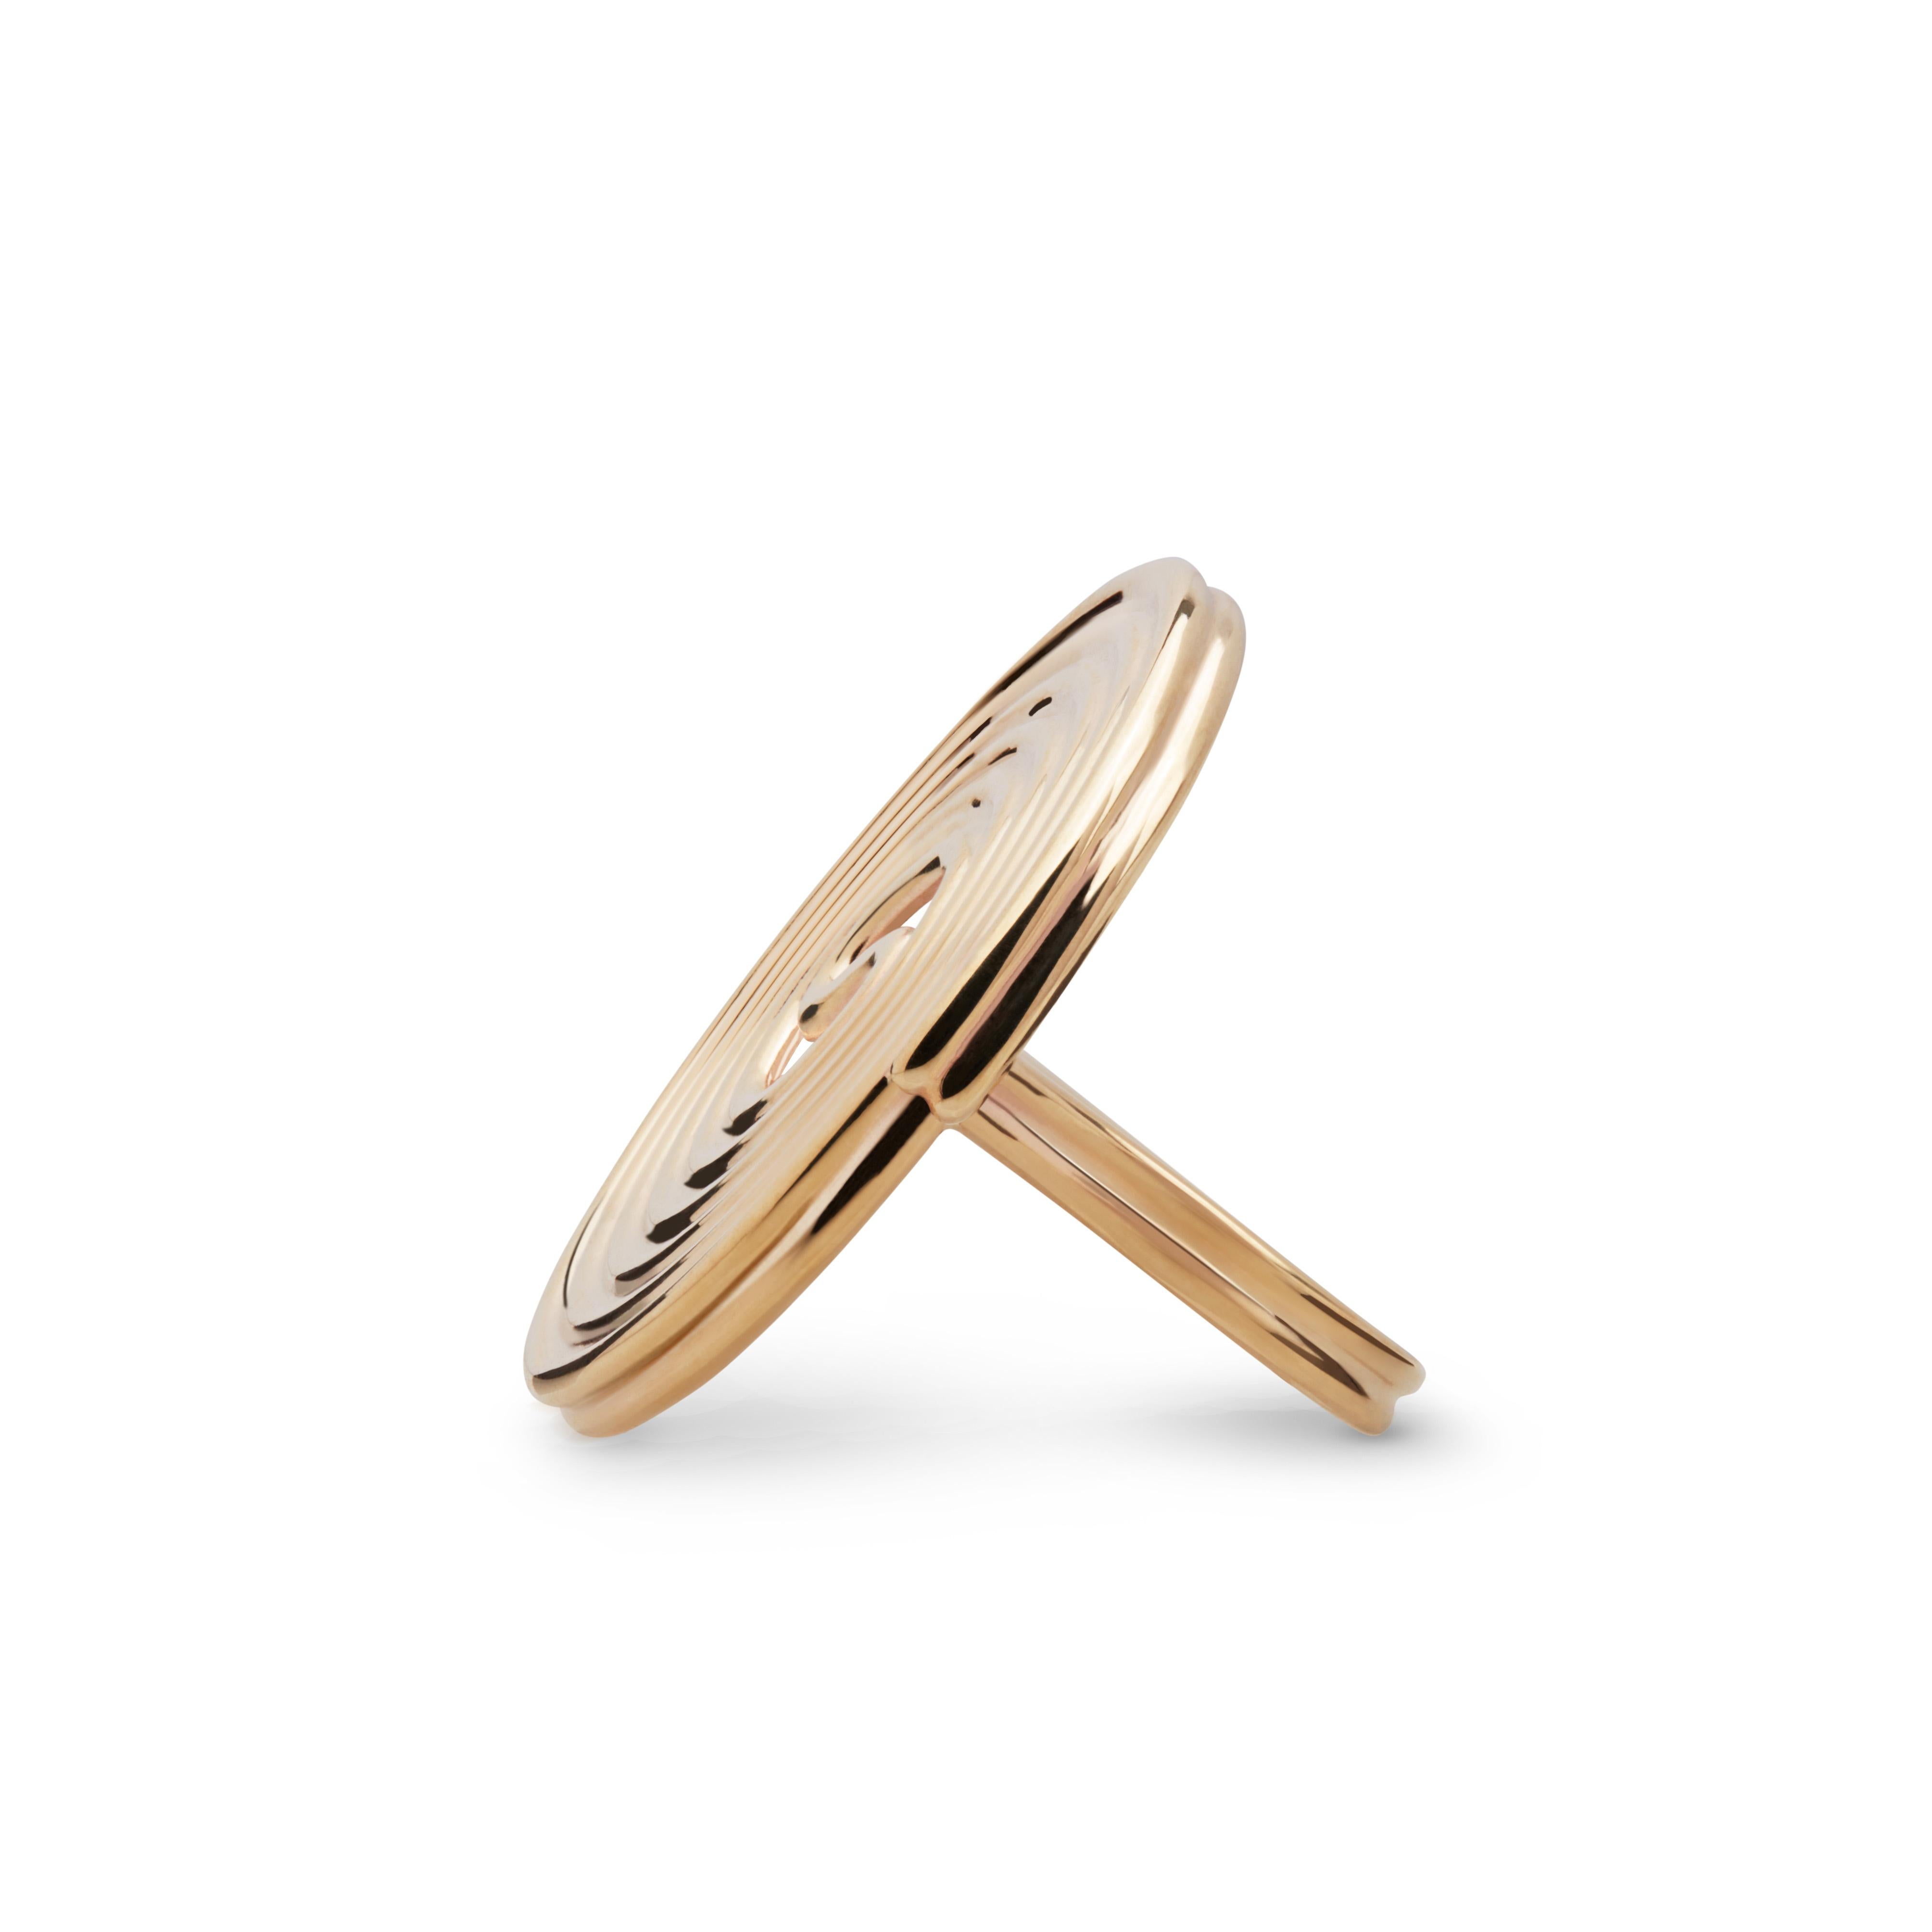 Alina’s Sugar High collection features a selection of candy-inspired pieces sprinkled with her signature of nostalgia, playfulness and bold, geometric designs.
This precious Licorice Ring is handcrafted from 9kt yellow gold. This is a truly sweet